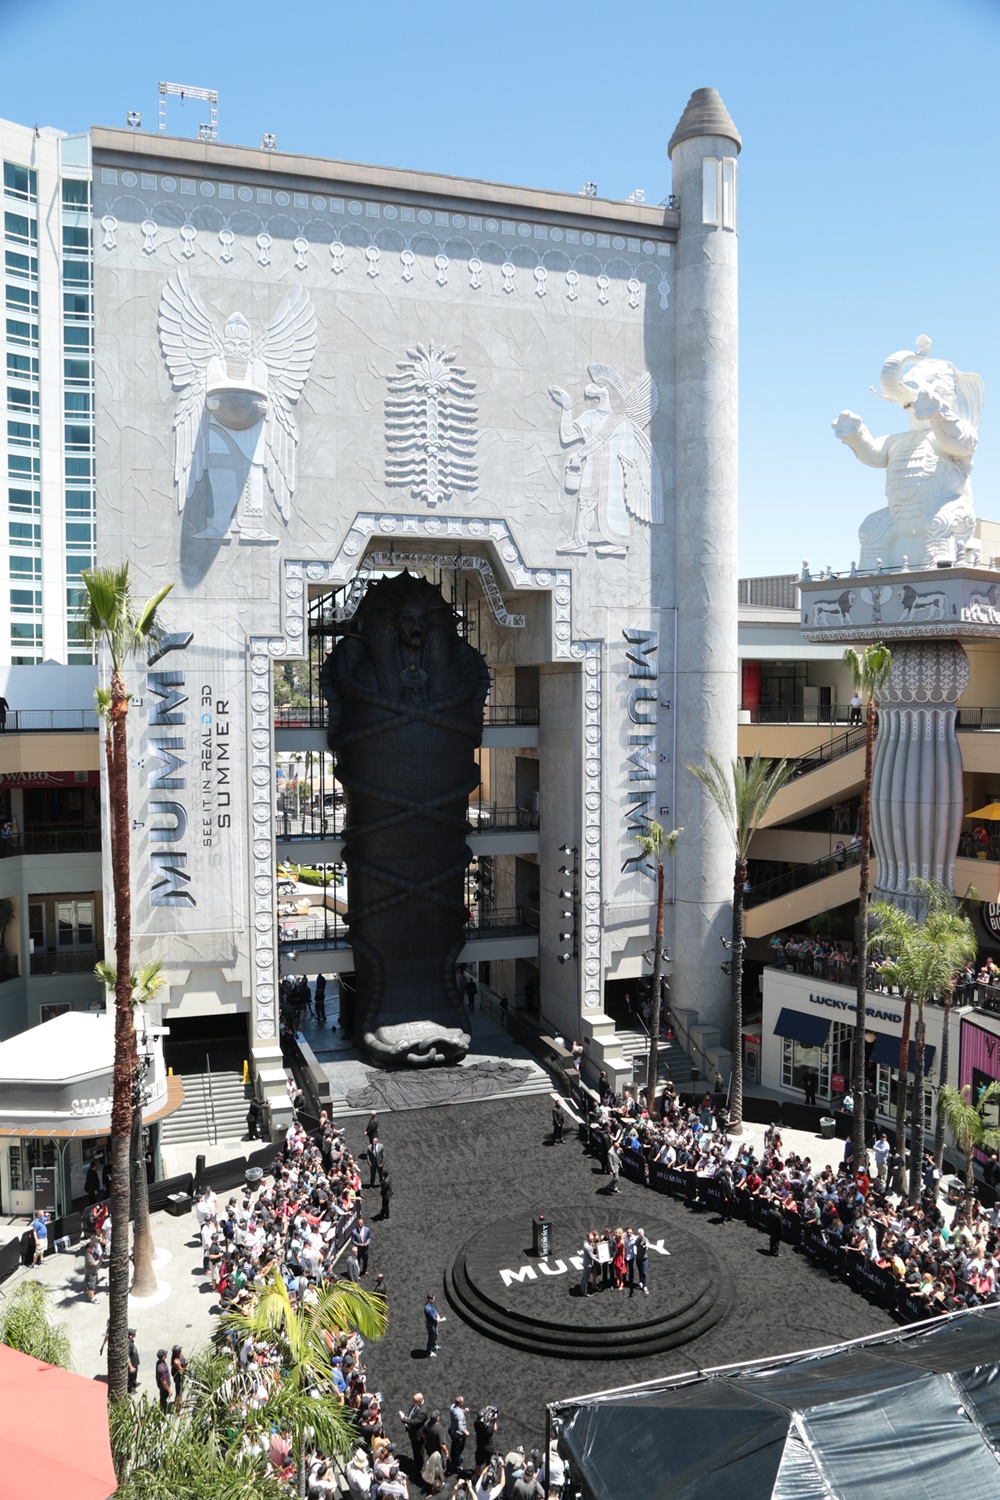 The 75-foot, 7-ton sarcophagus is unveiled as Universal Pictures and RealD present "The Mummy Day" at Hollywood & Highland Gateway in Hollywood, California on Saturday May 20, 2017.  (Photo: Alex J. Berliner  / ABImages)